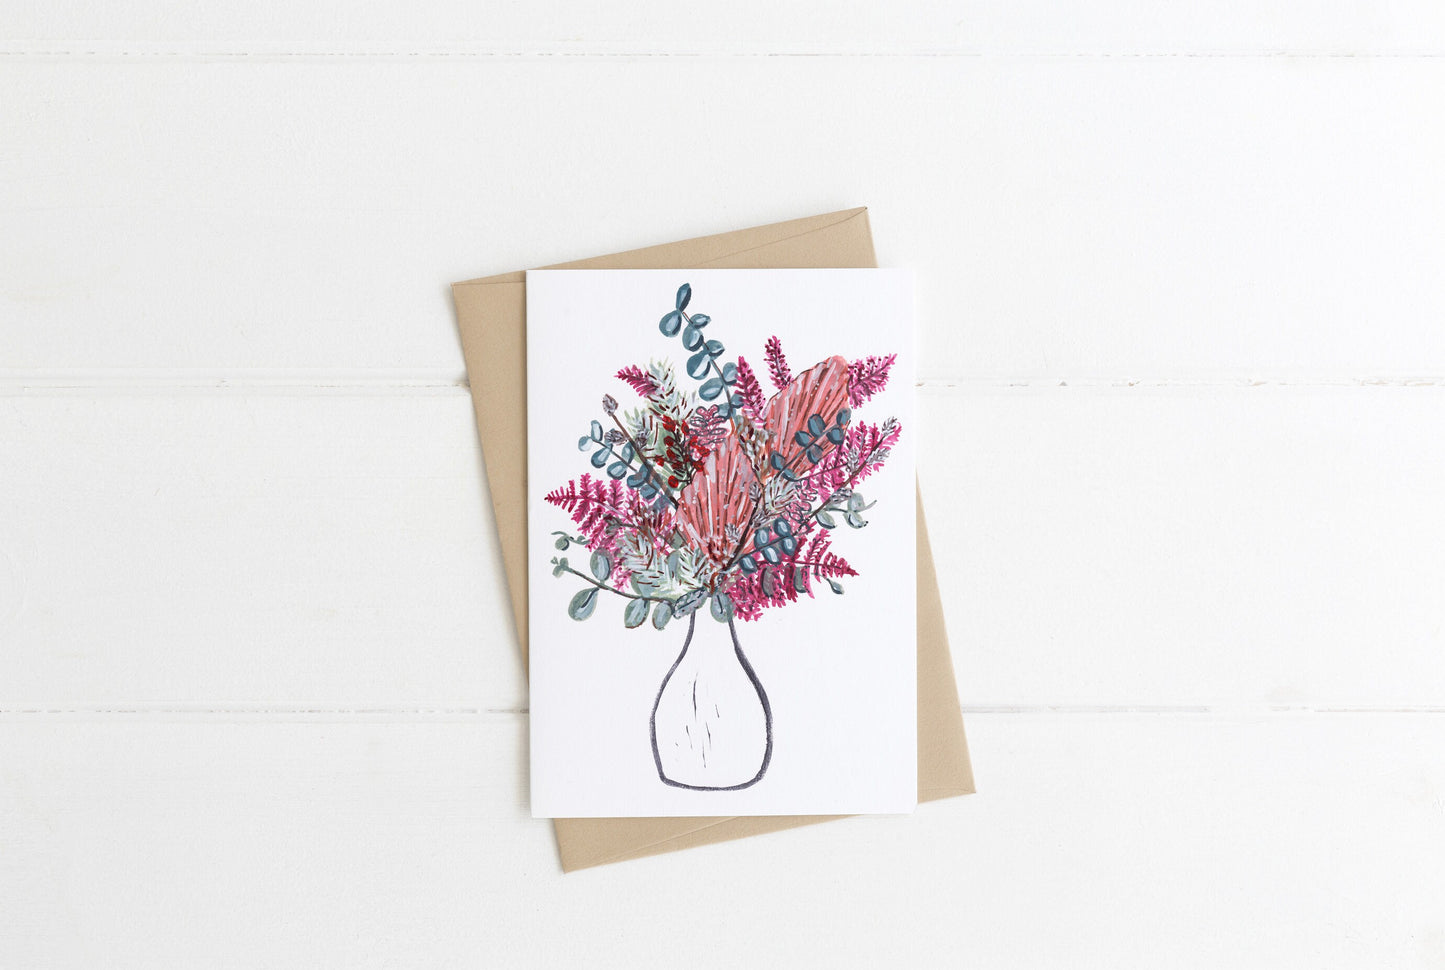 Winter Vases | Illustrated floral | Set of 2 A6 Cards